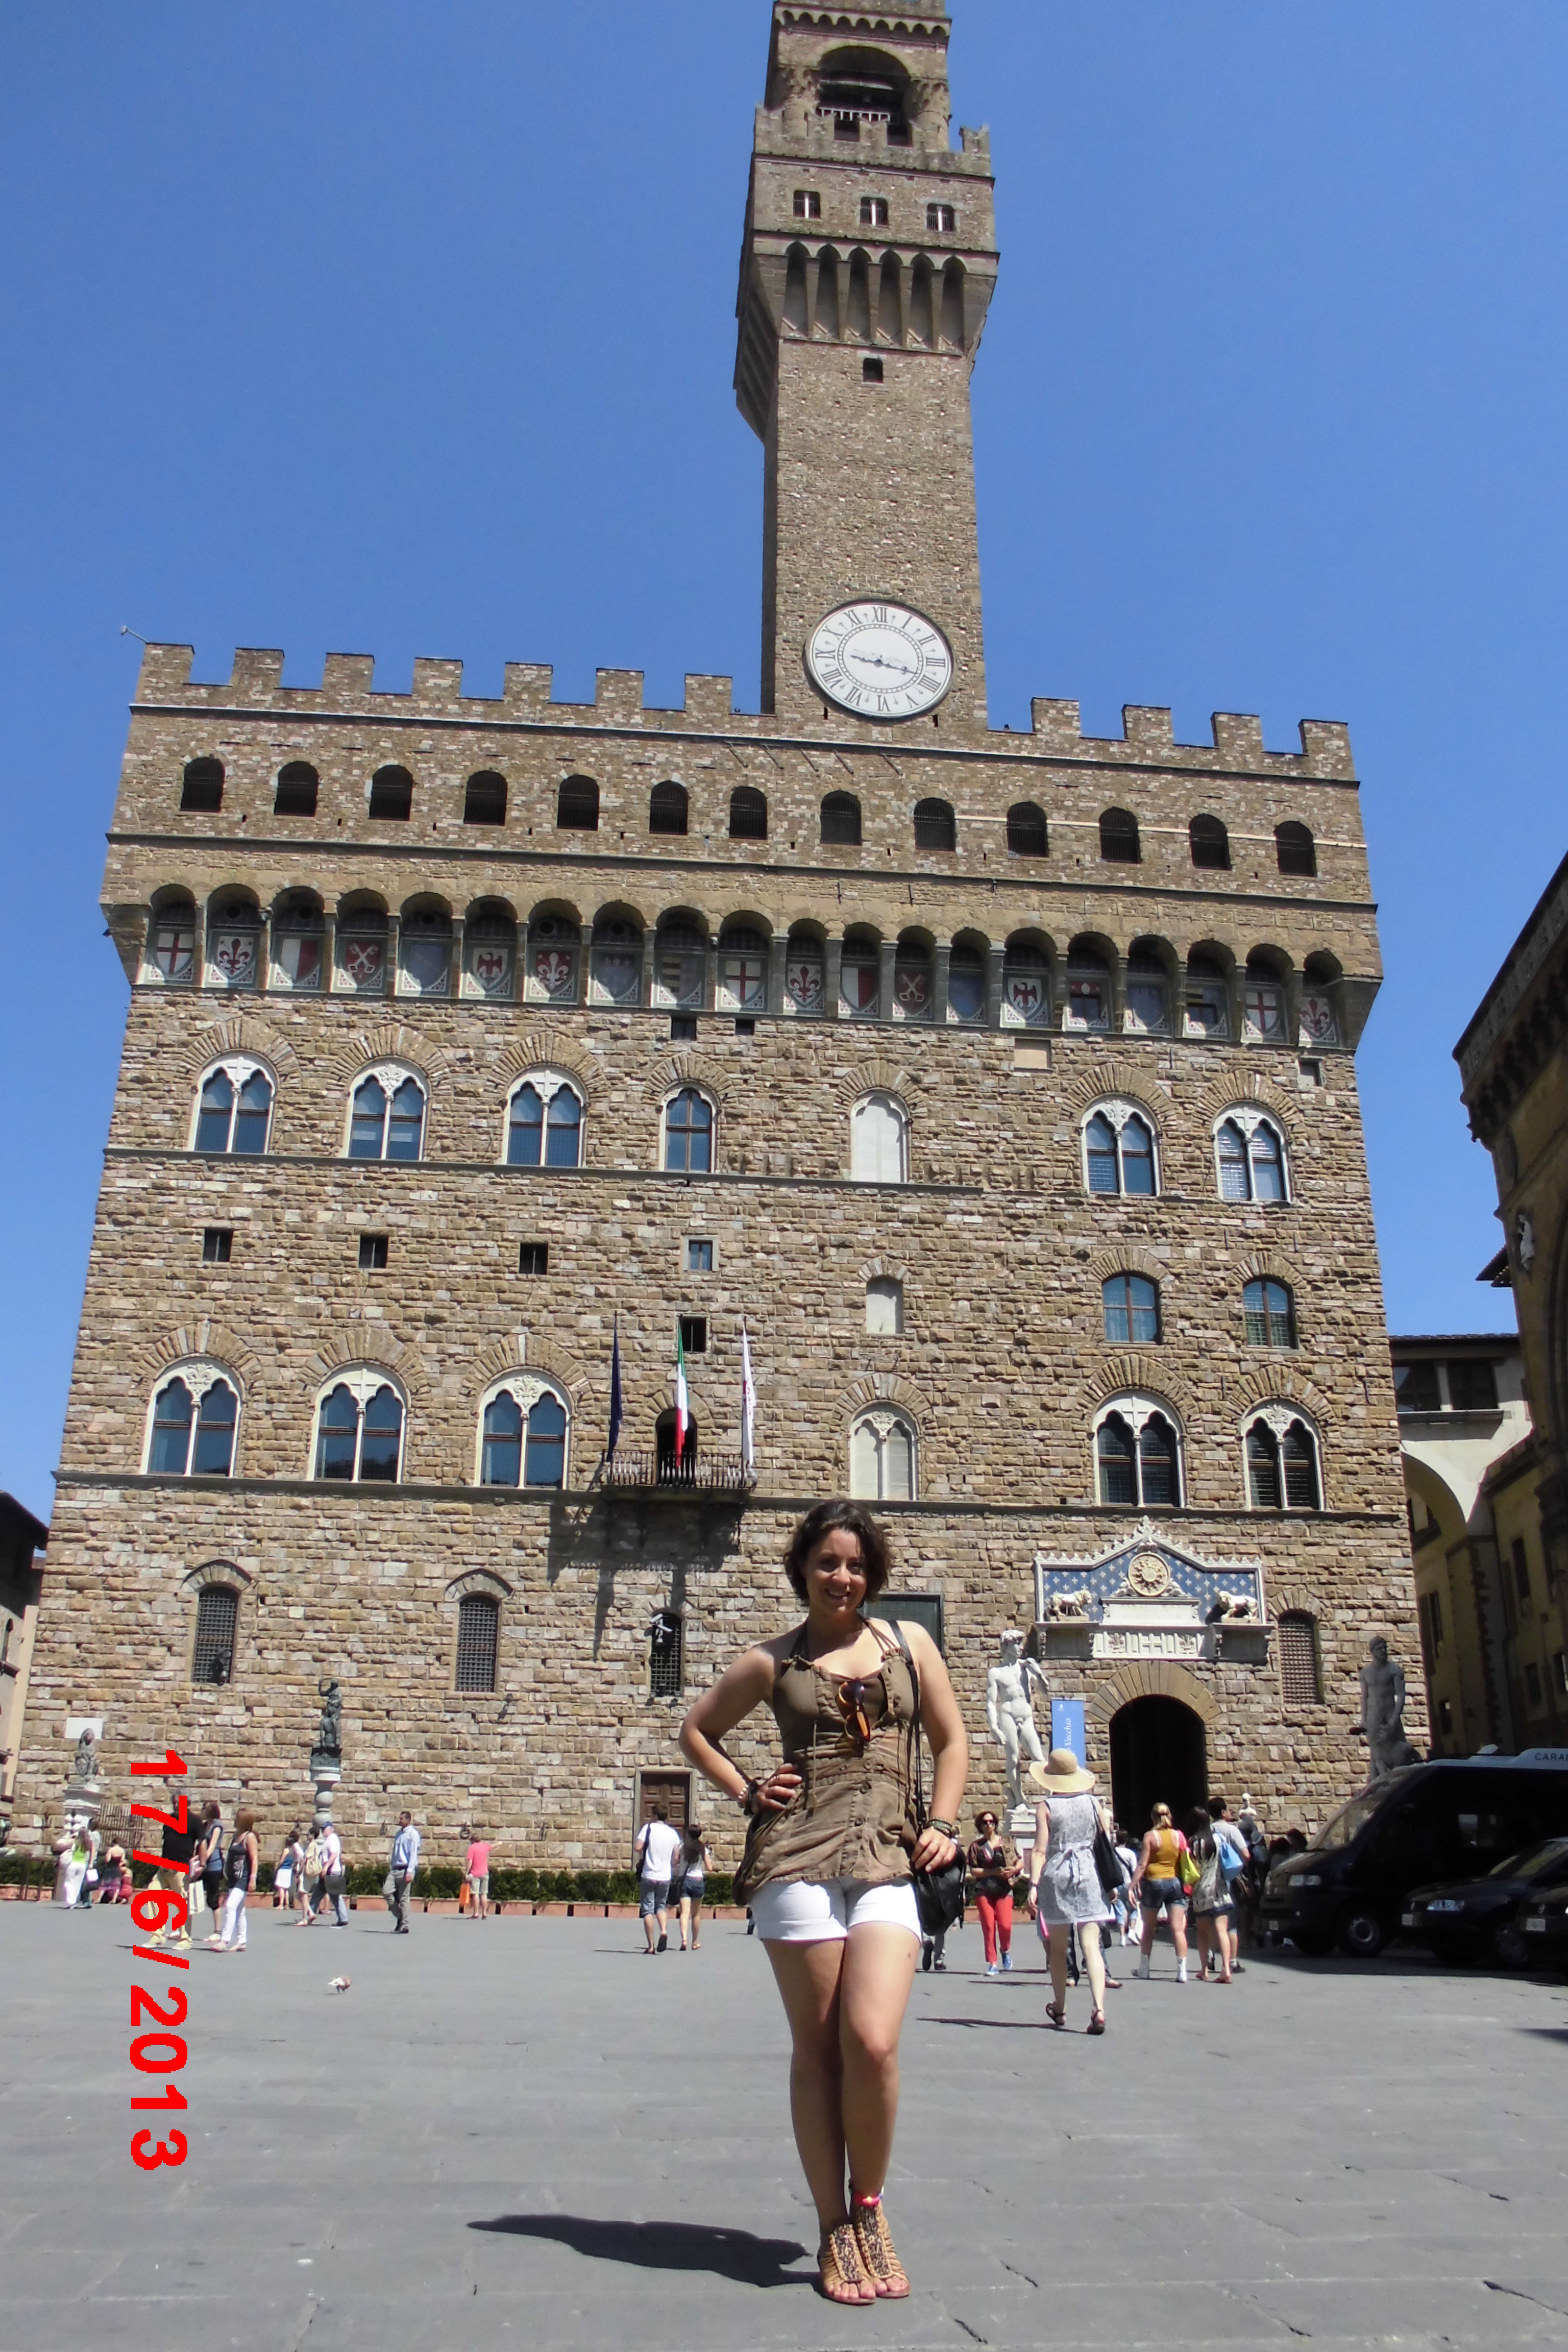 Olivia Vargus in front of large building with clock